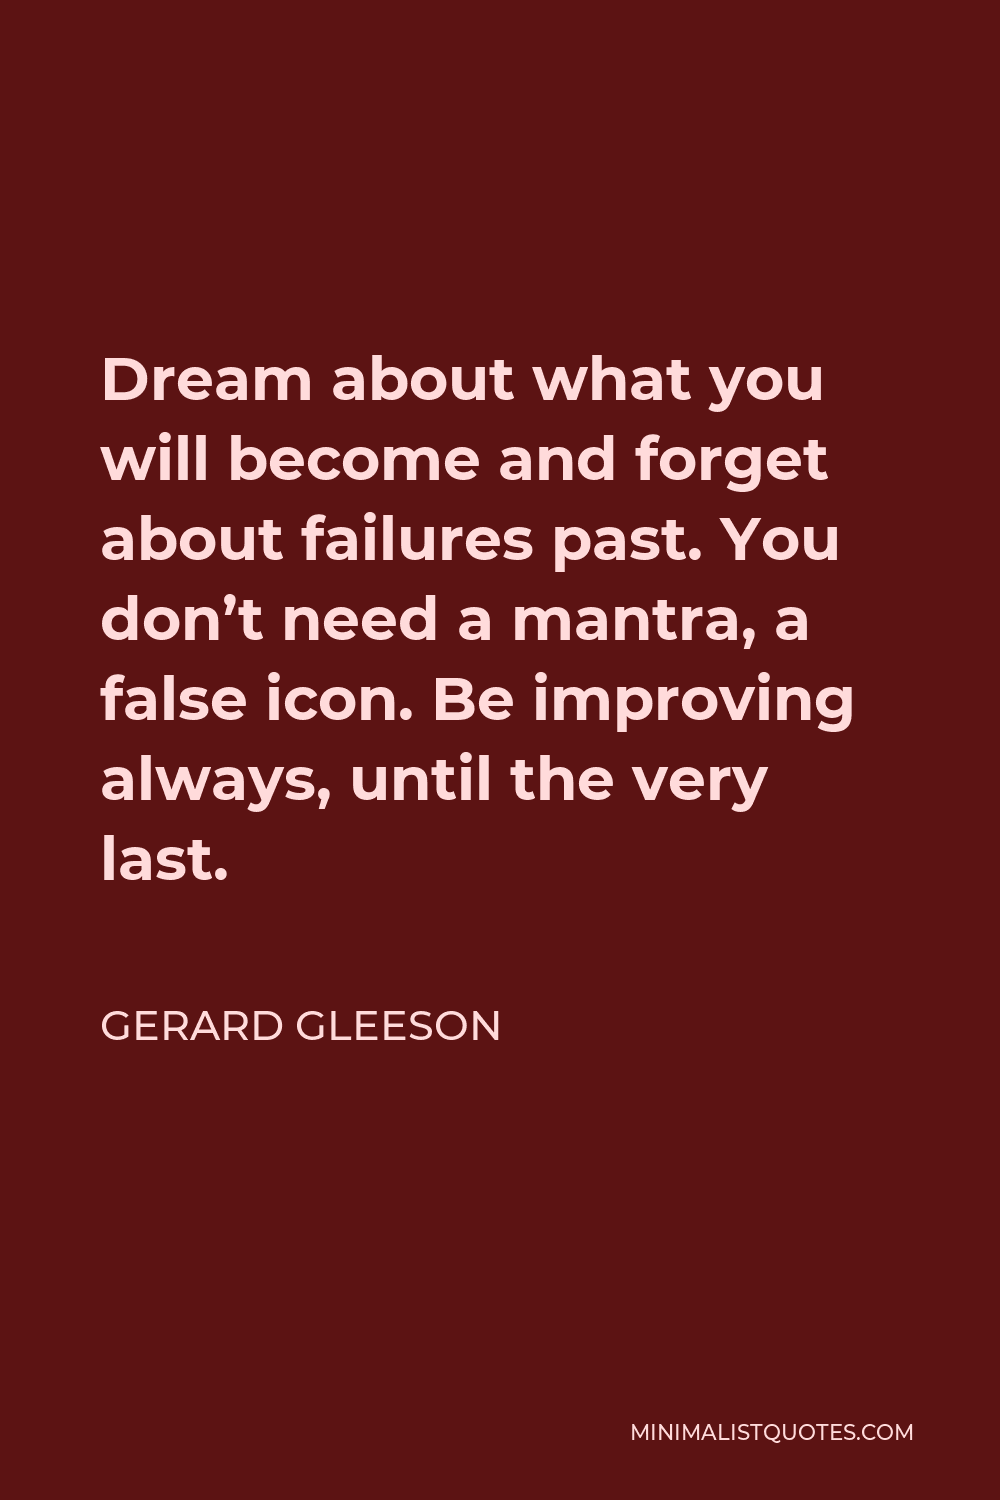 Gerard Gleeson Quote: Dream about what you will become and forget about ...